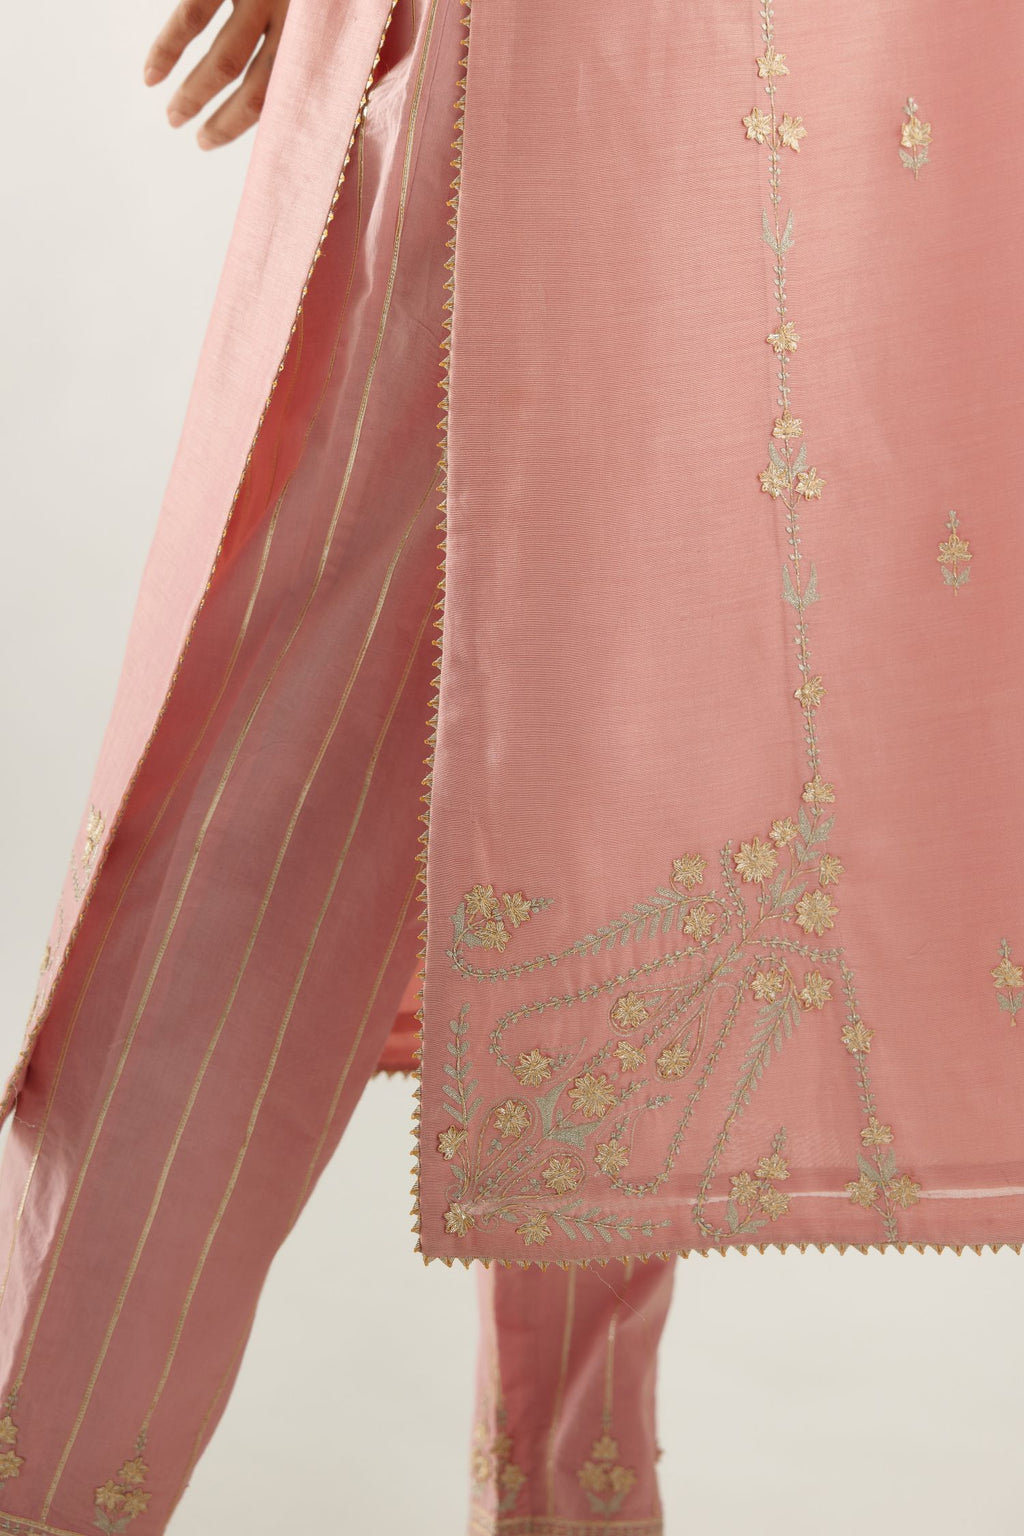 Pink silk chanderi straight kurta set with button placket neckline, highlighted with all-over gold gota and zari embroidery.